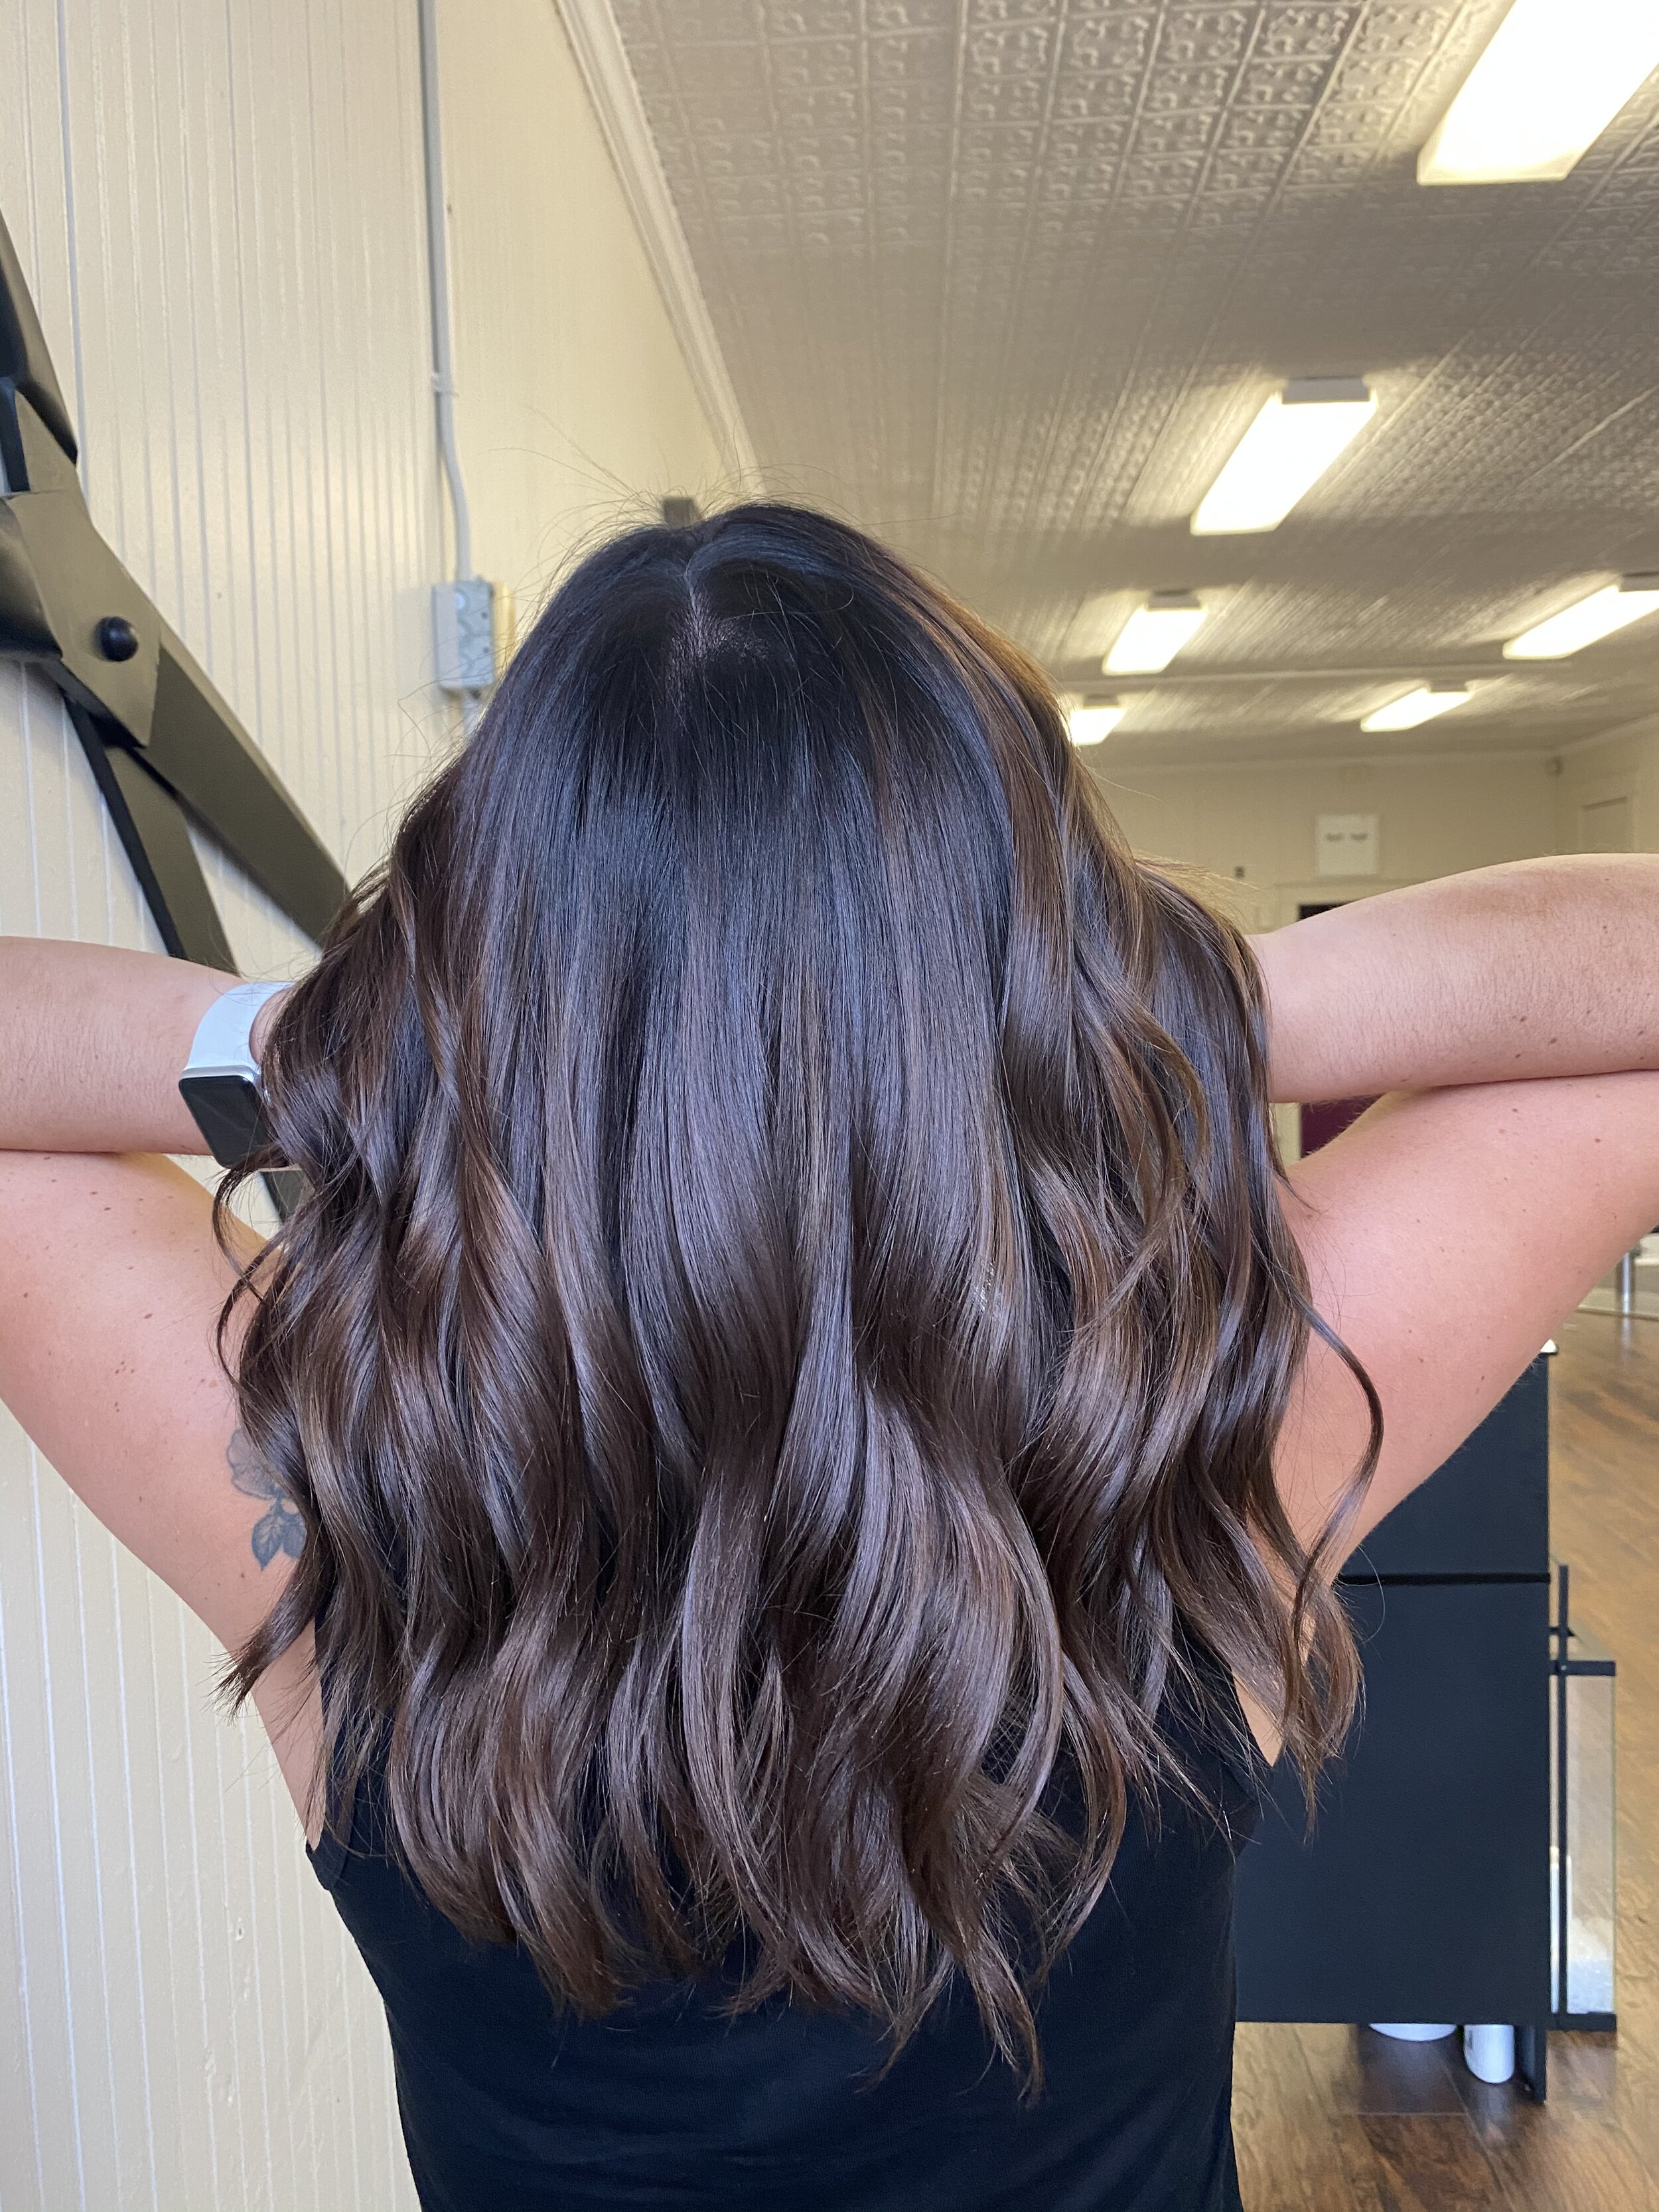 Melted brunette created by Carleigh Dlugosz